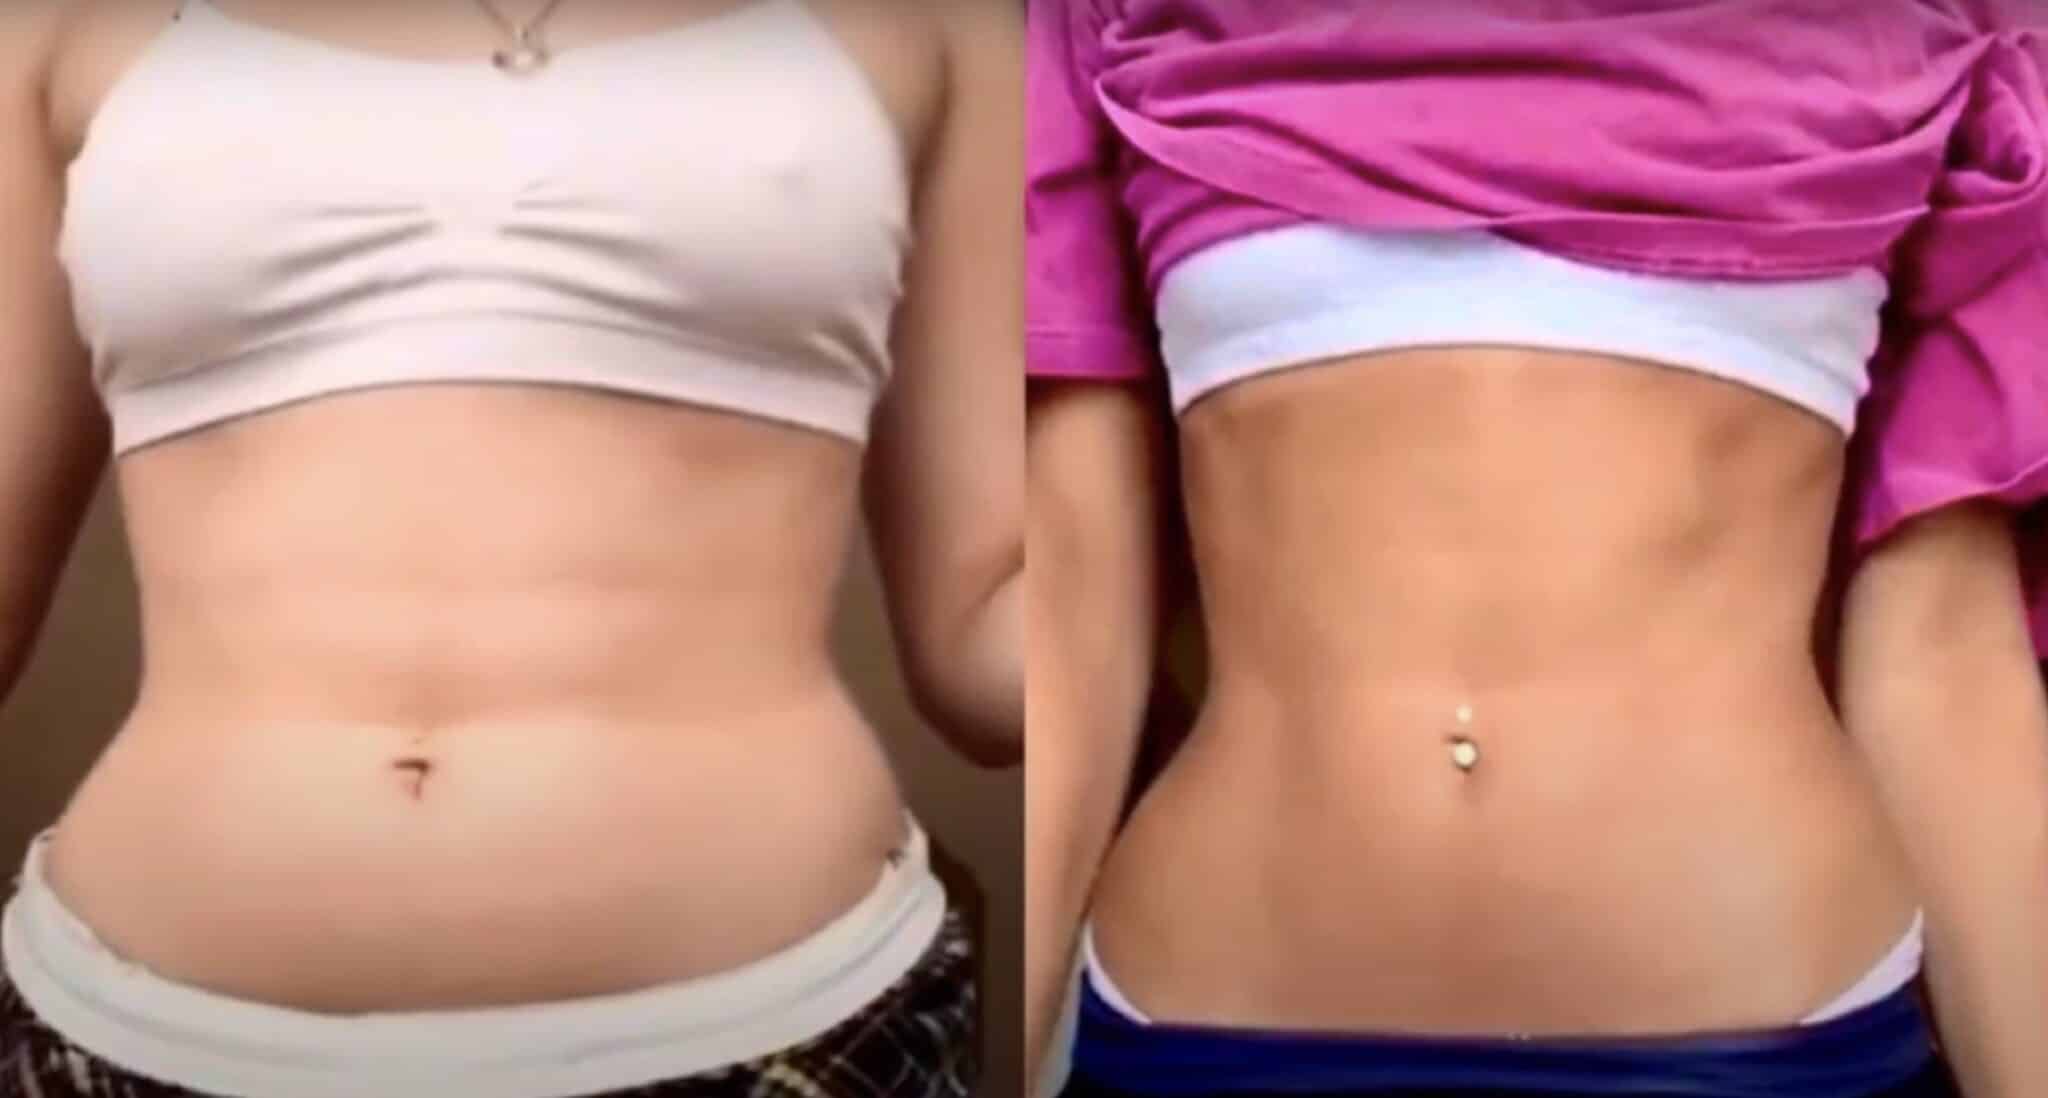 UltraCavitat Fat & Cellulite Remover - Before and After Results